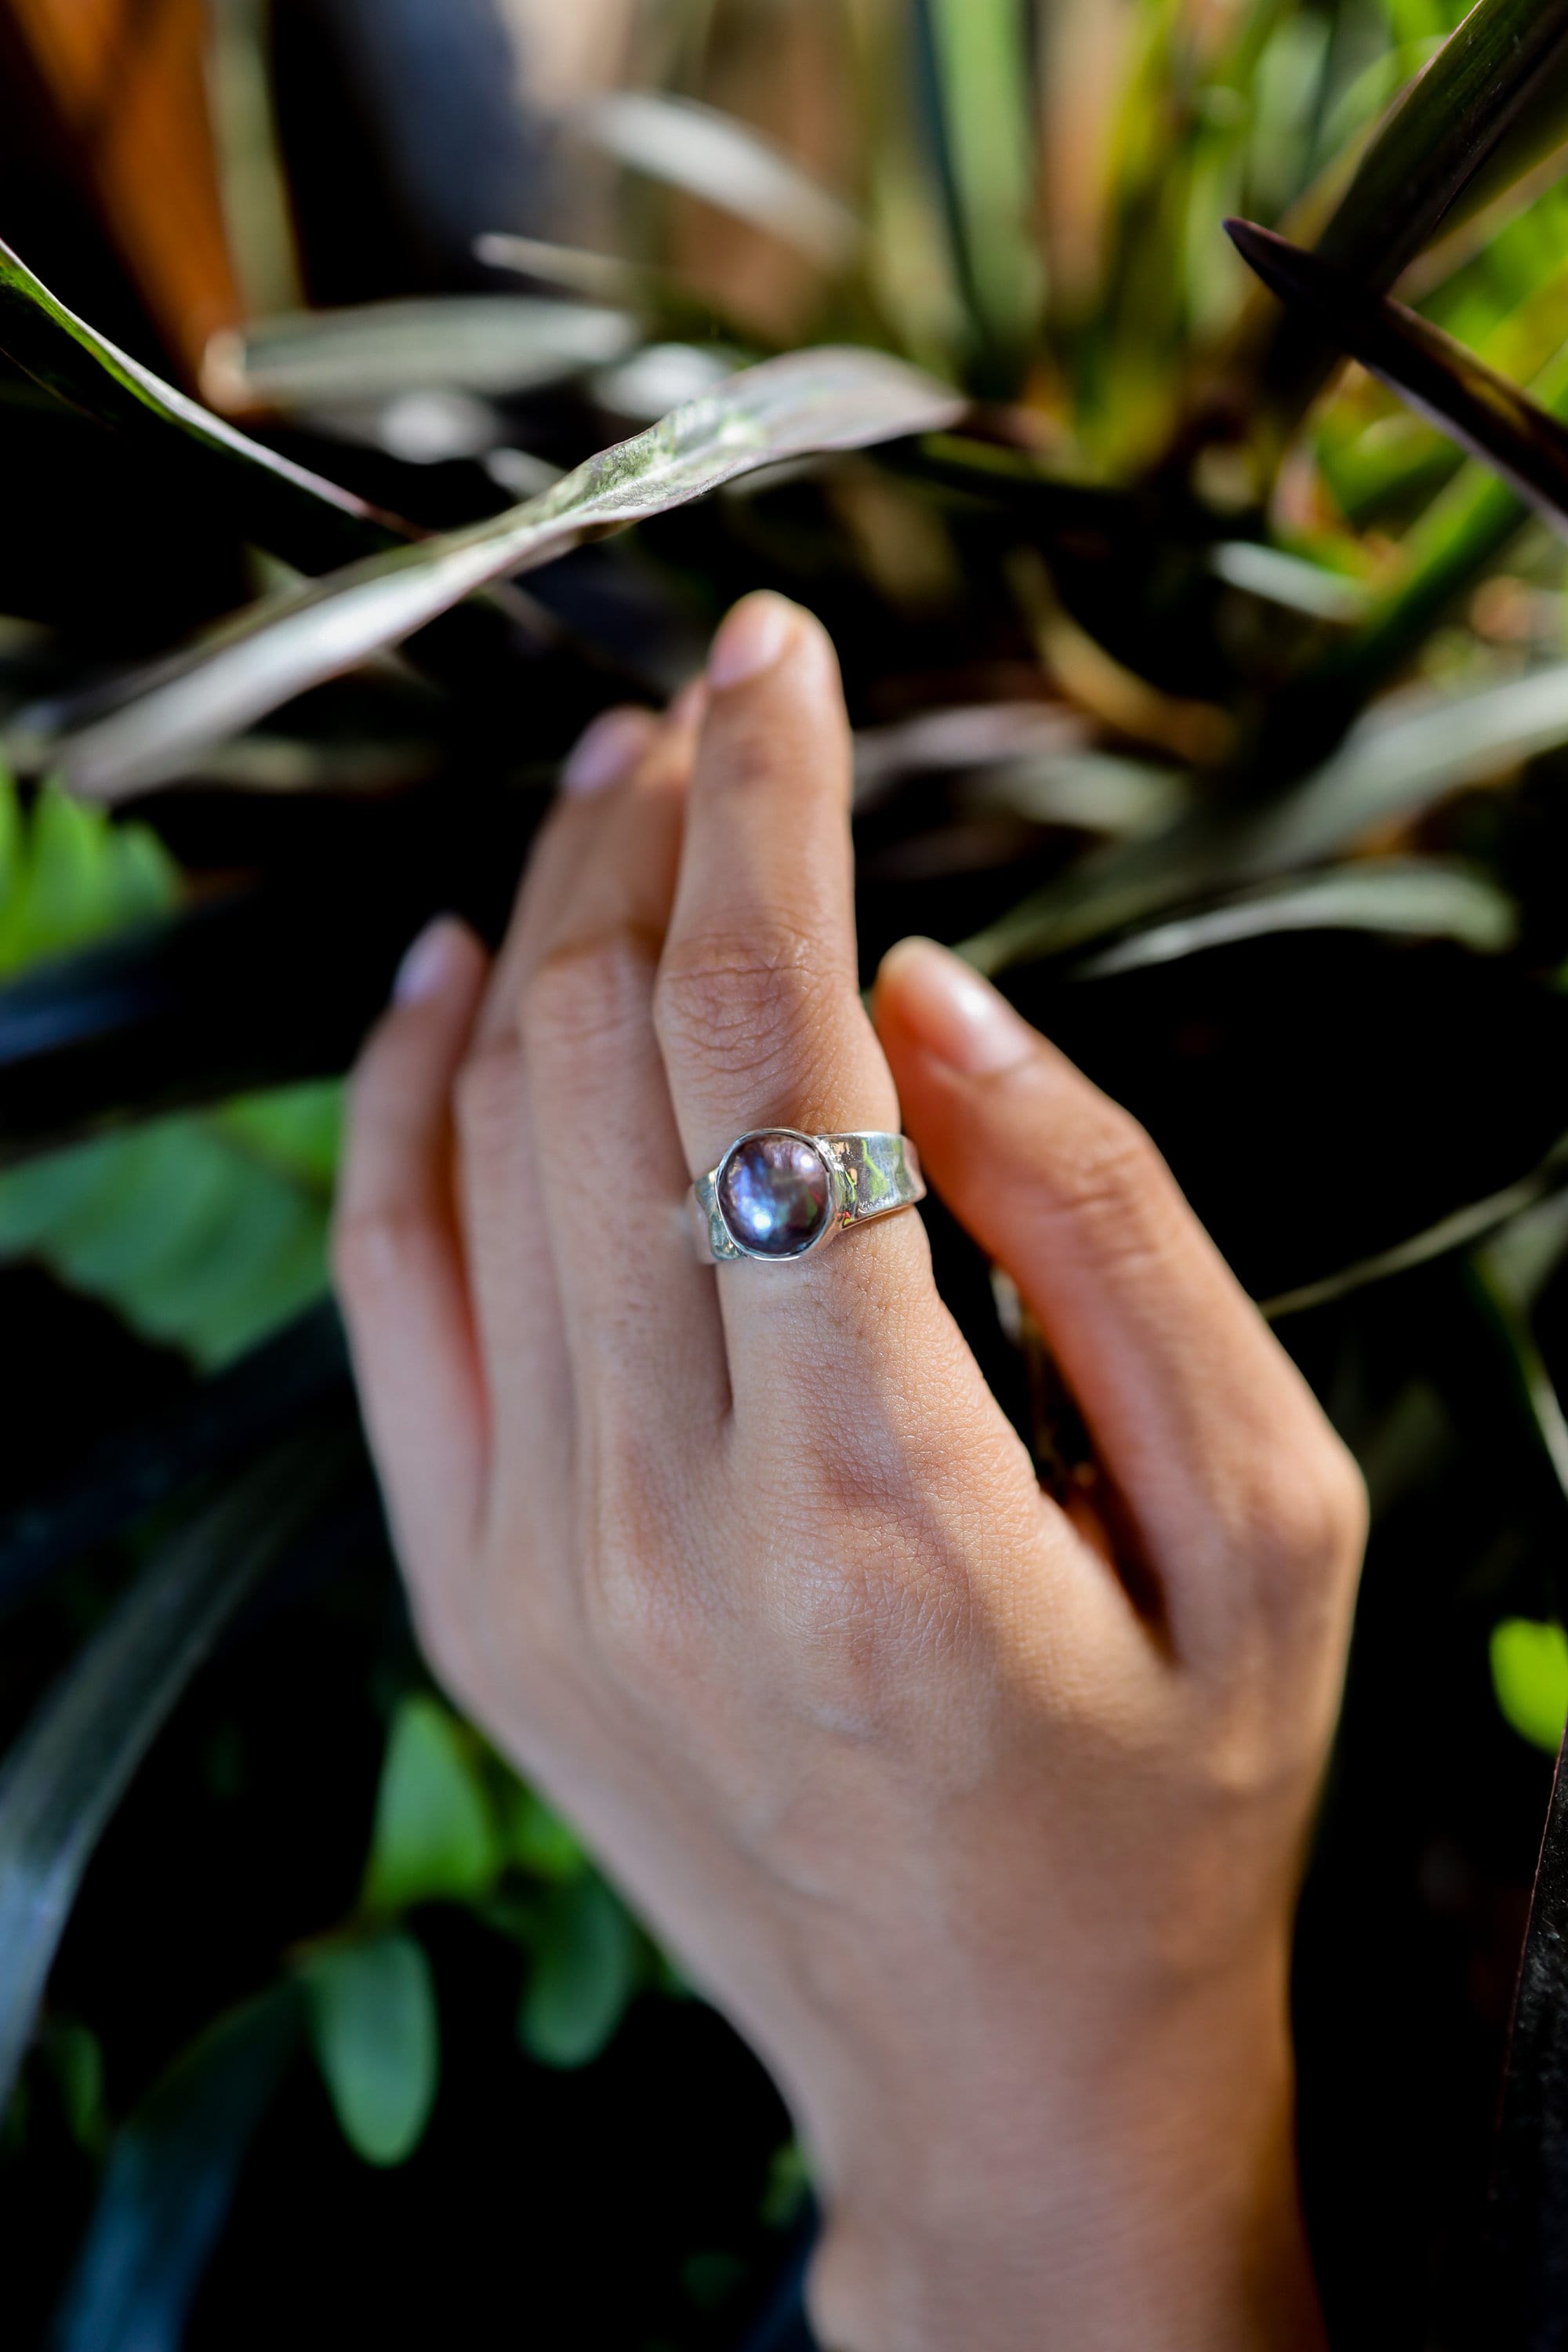 Tahitian Black Pearls with Rainbow Luster Ring - Hammered - 925 Sterling Silver Setting - Unisex - High Shine Polish - Promotes Inner Wisdom